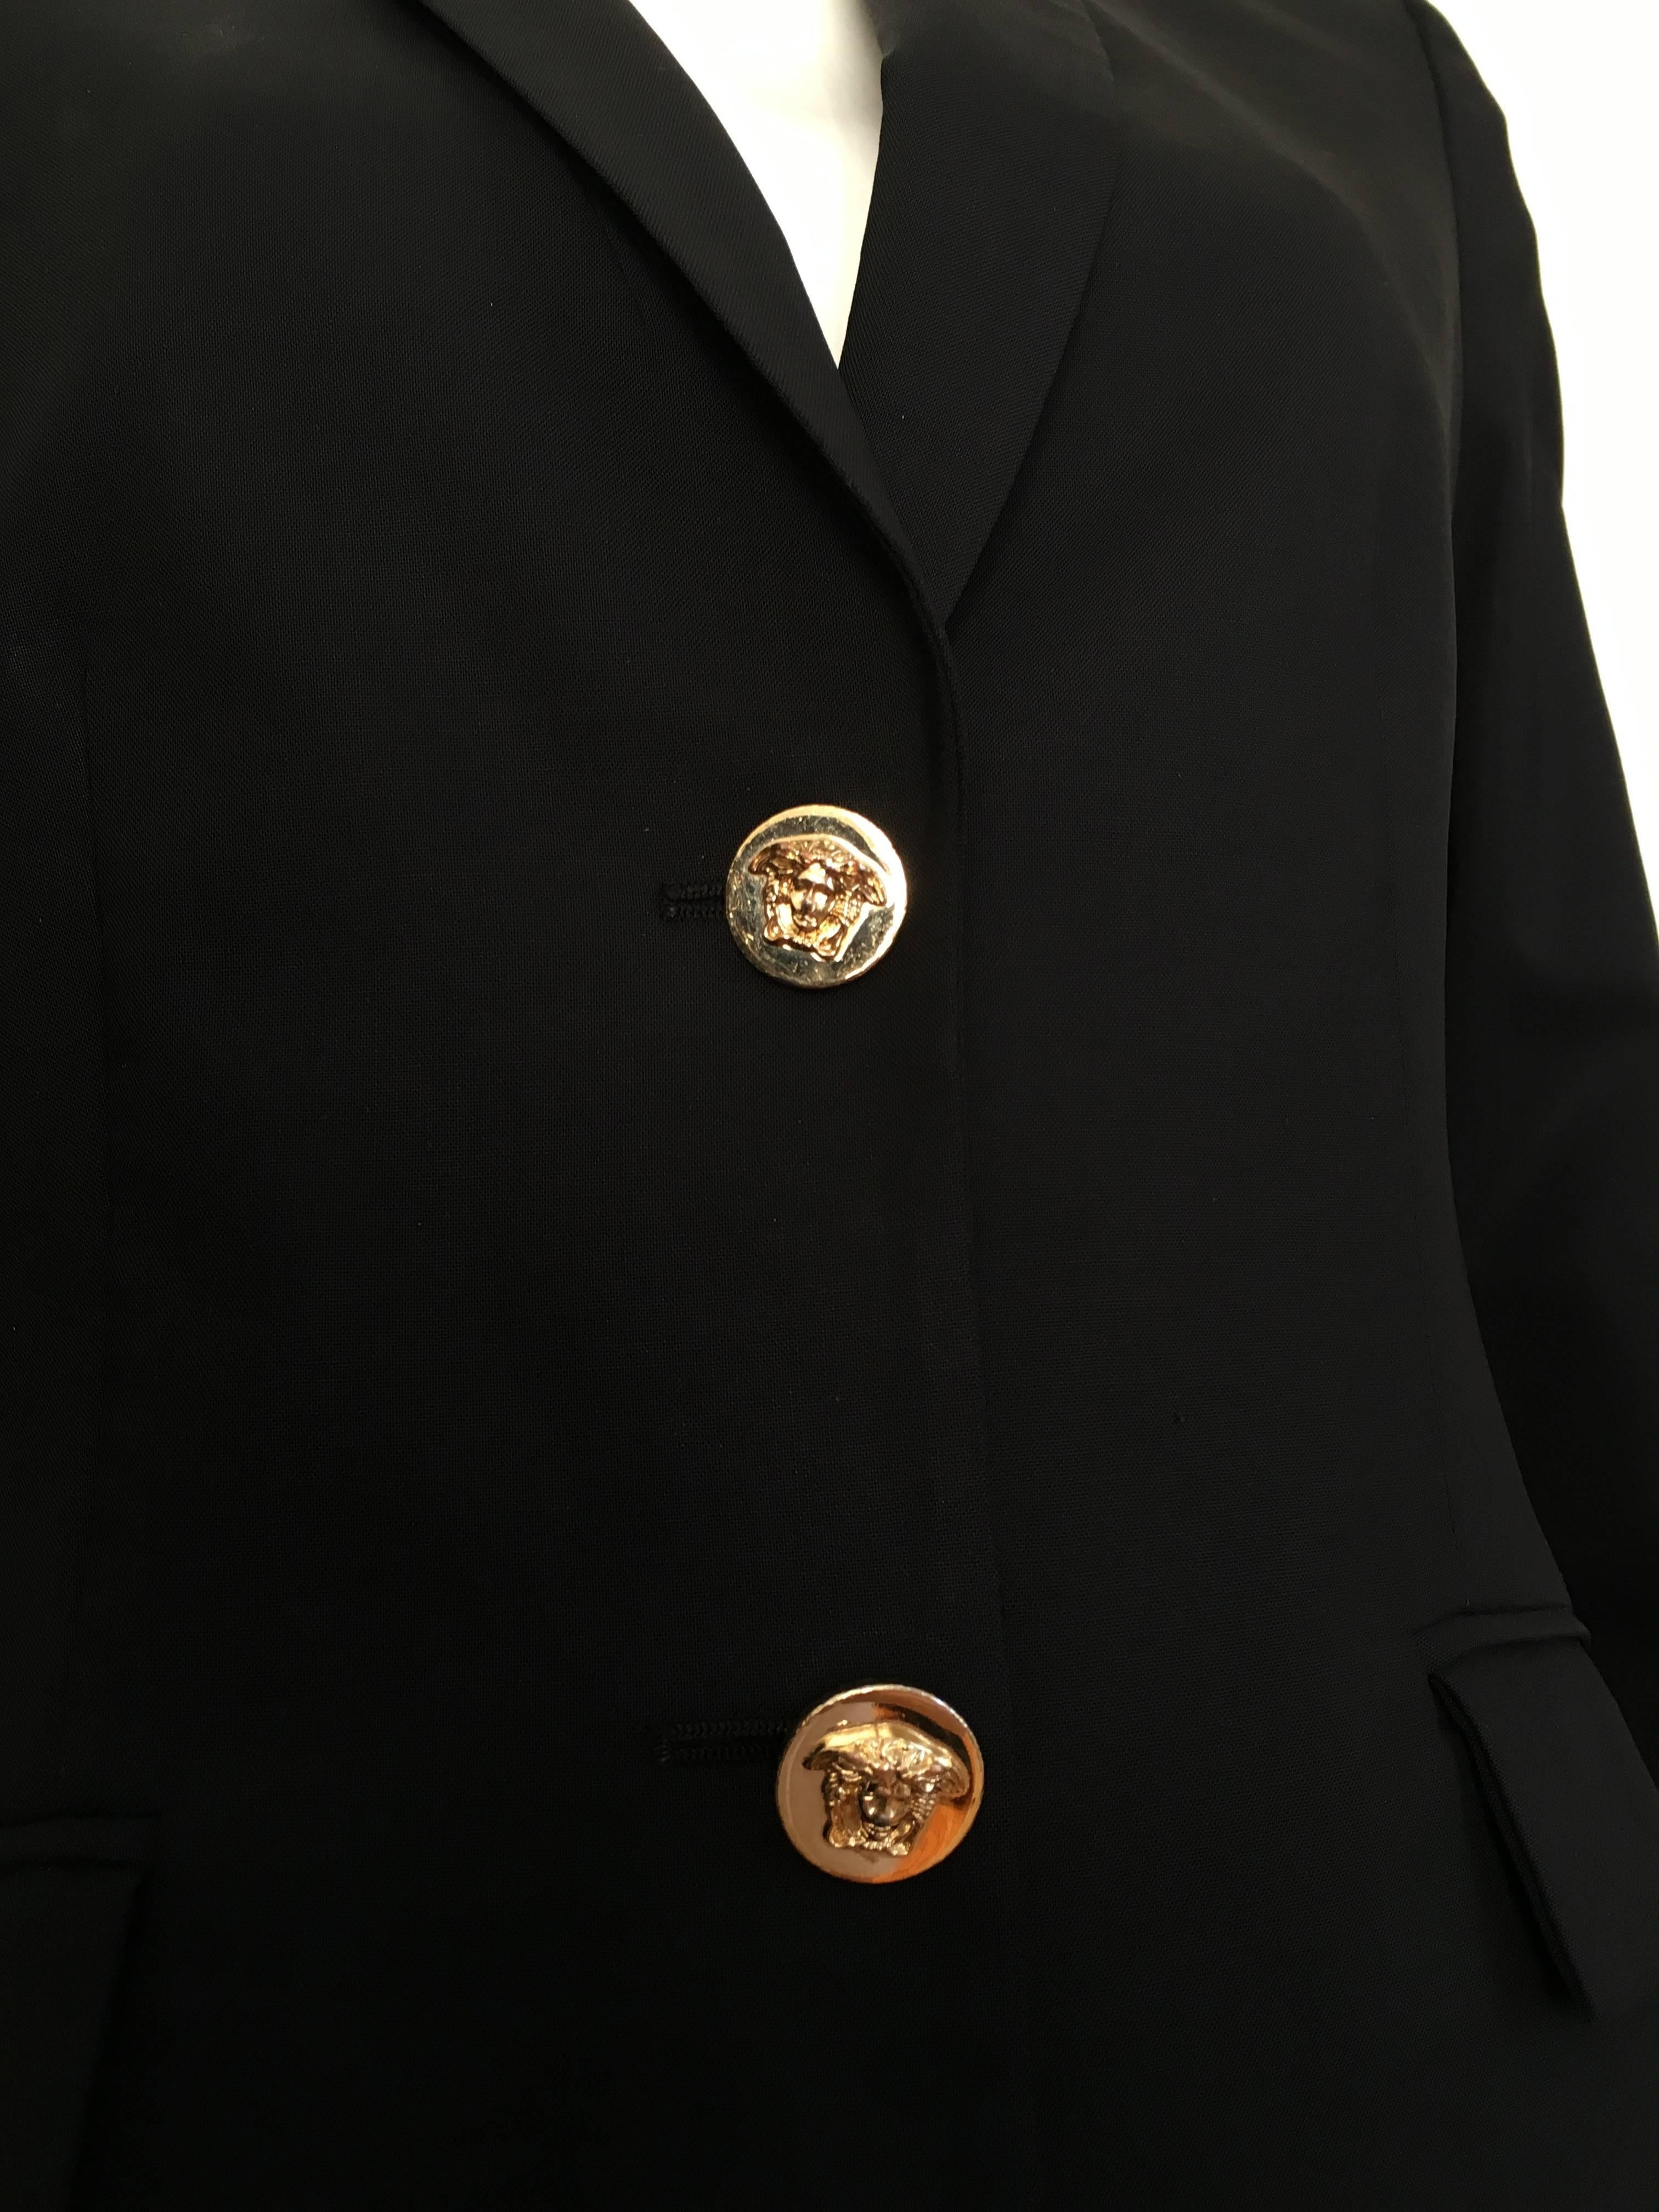 Versace Black Wool Jacket Size 6. In Good Condition For Sale In Atlanta, GA